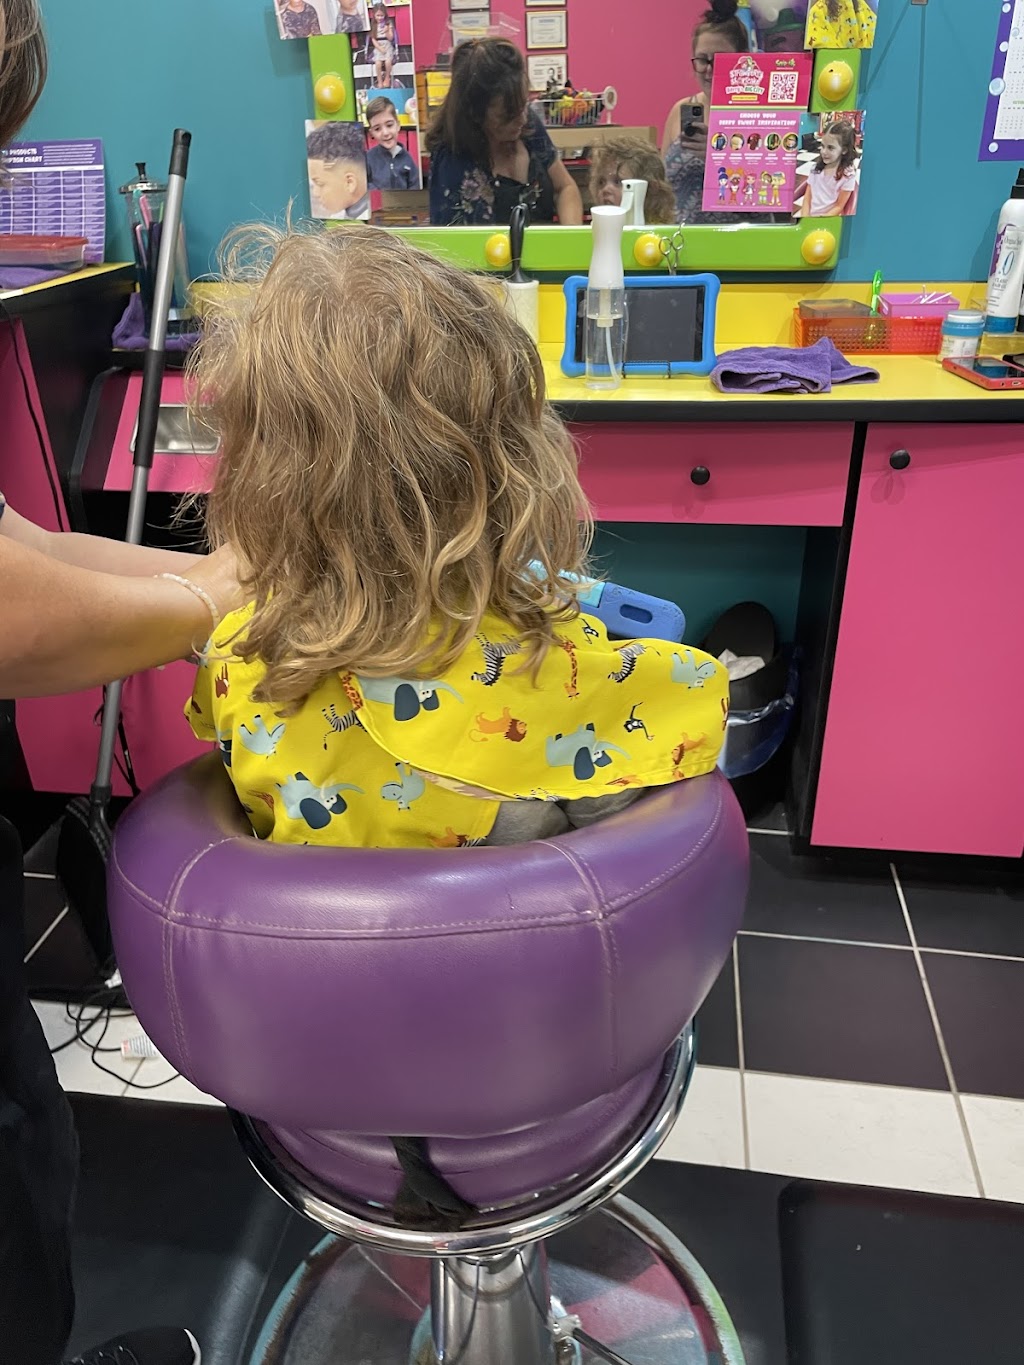 Snip-its Haircuts for Kids | 1966 Jericho Turnpike, East Northport, NY 11731 | Phone: (631) 486-7477